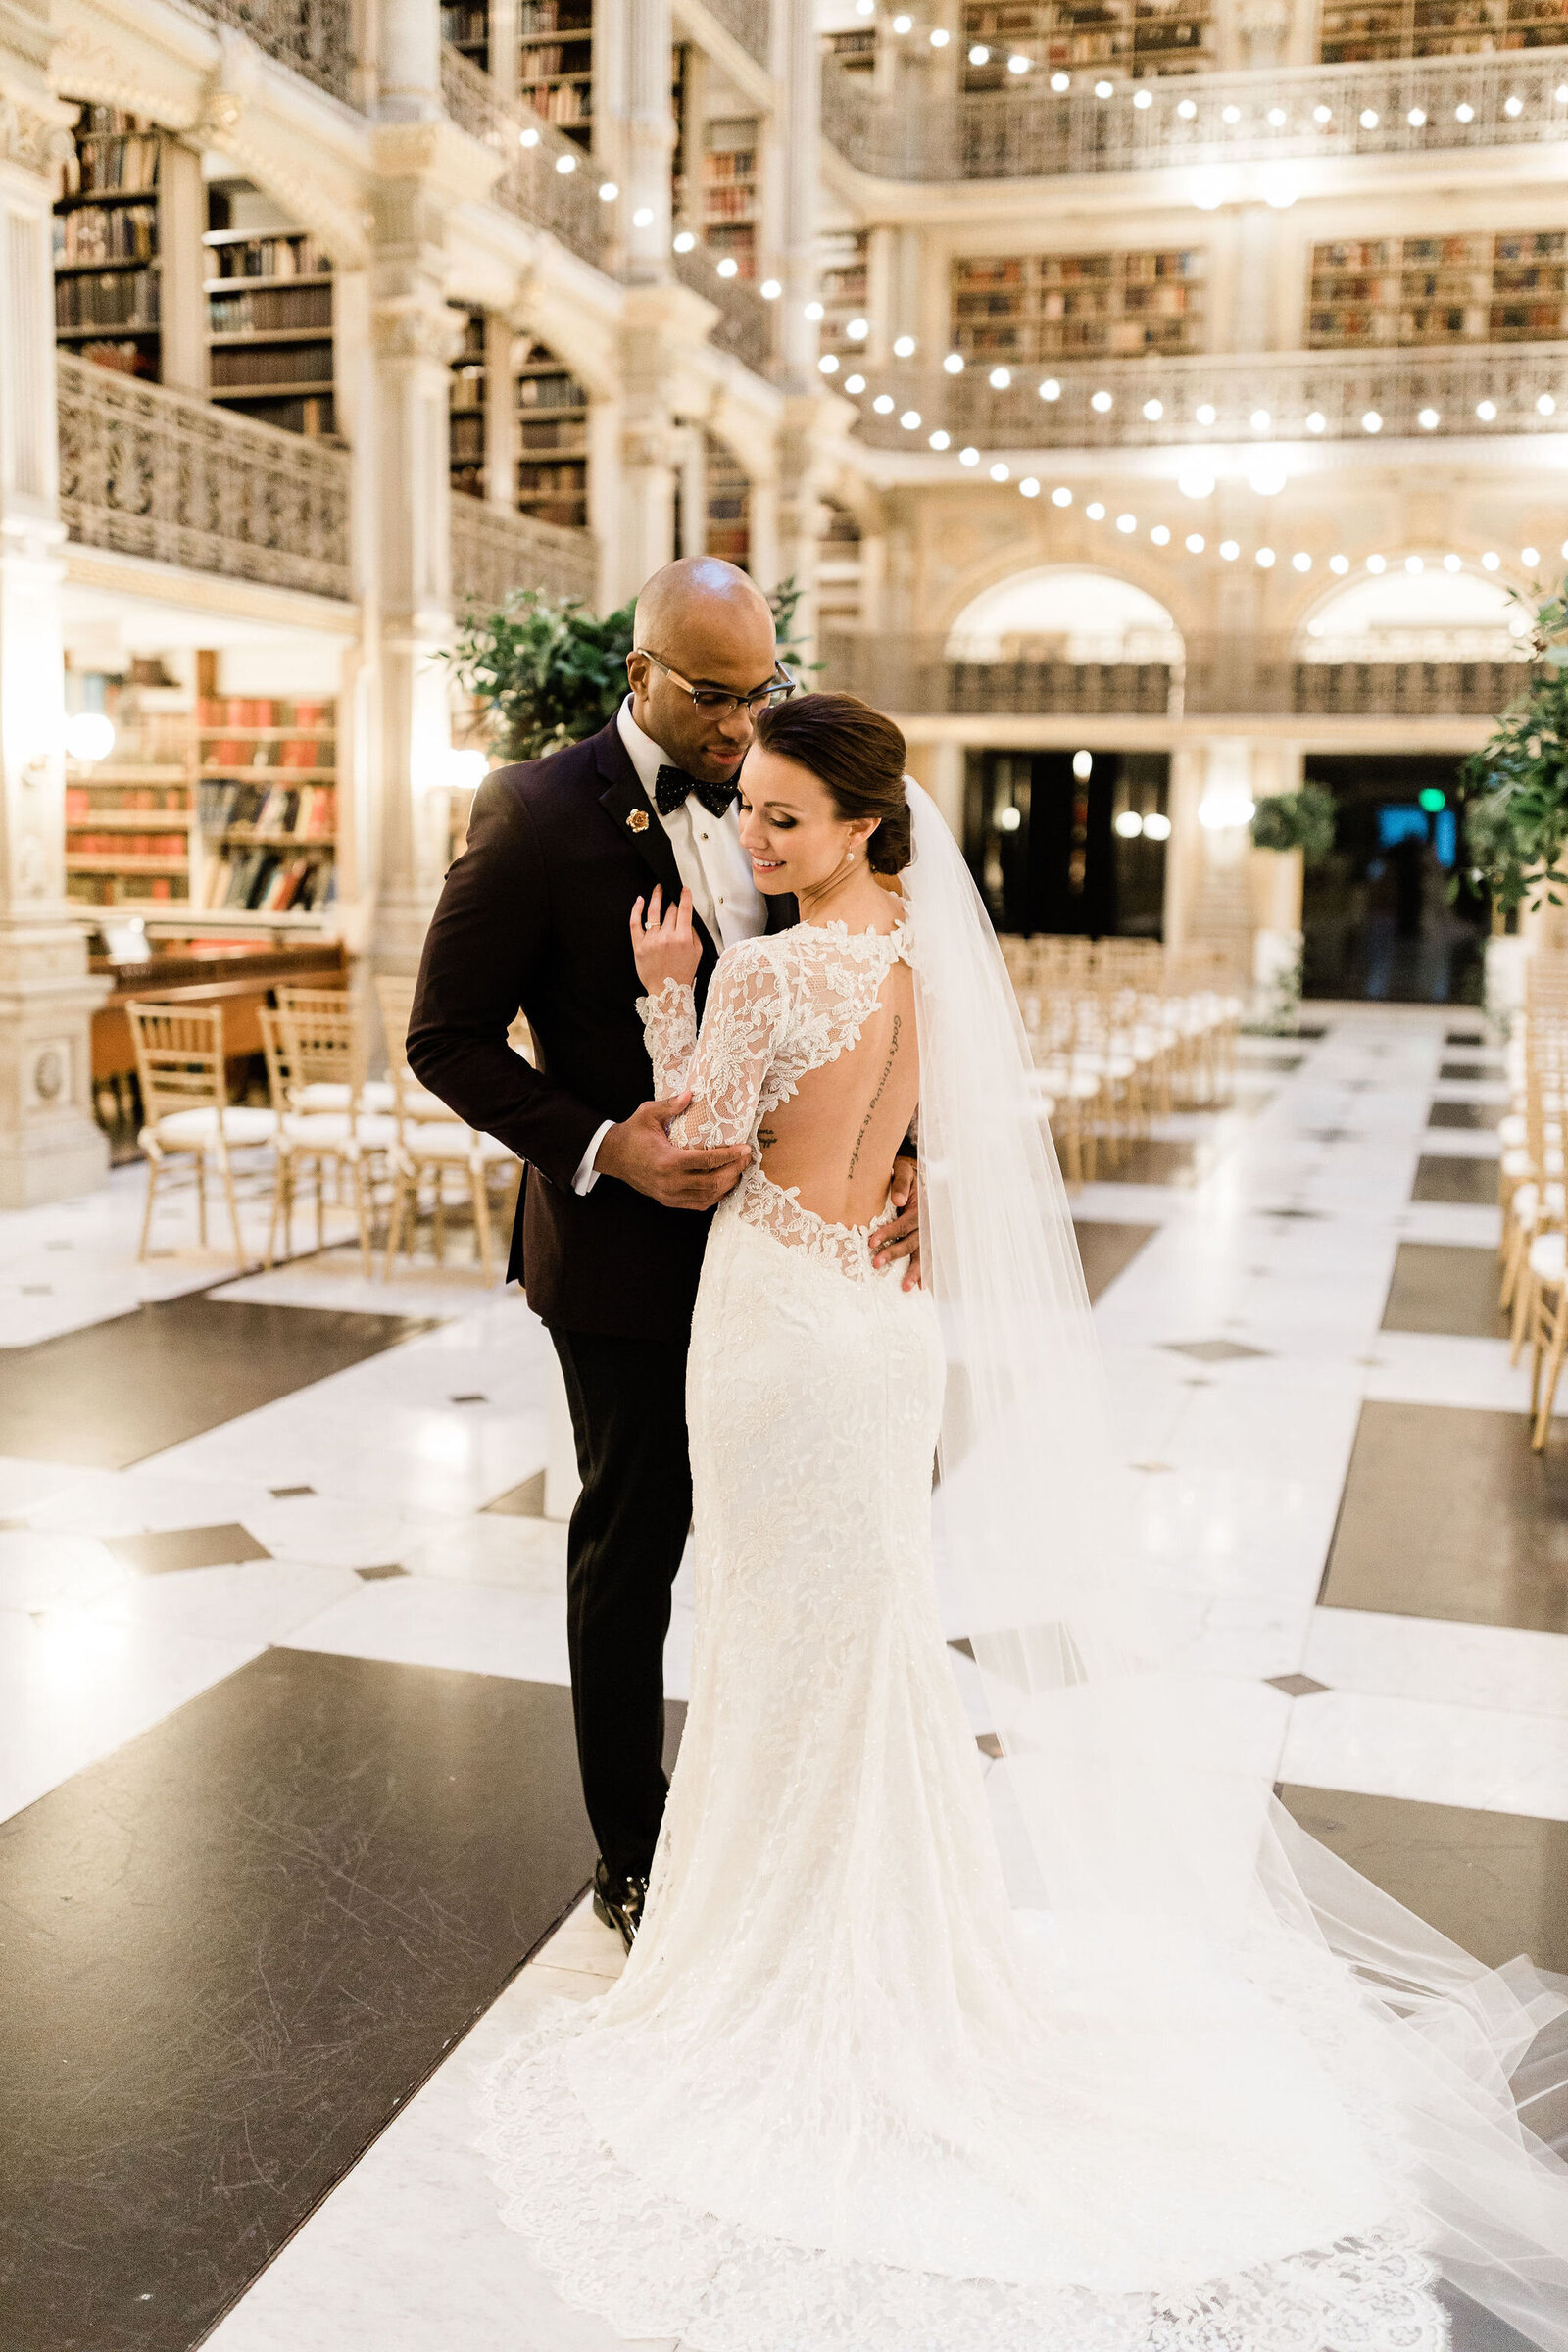 Beautiful Wedding Day Couples photos | The Peabody Library Baltimore MD | The Axtells Photo and Film